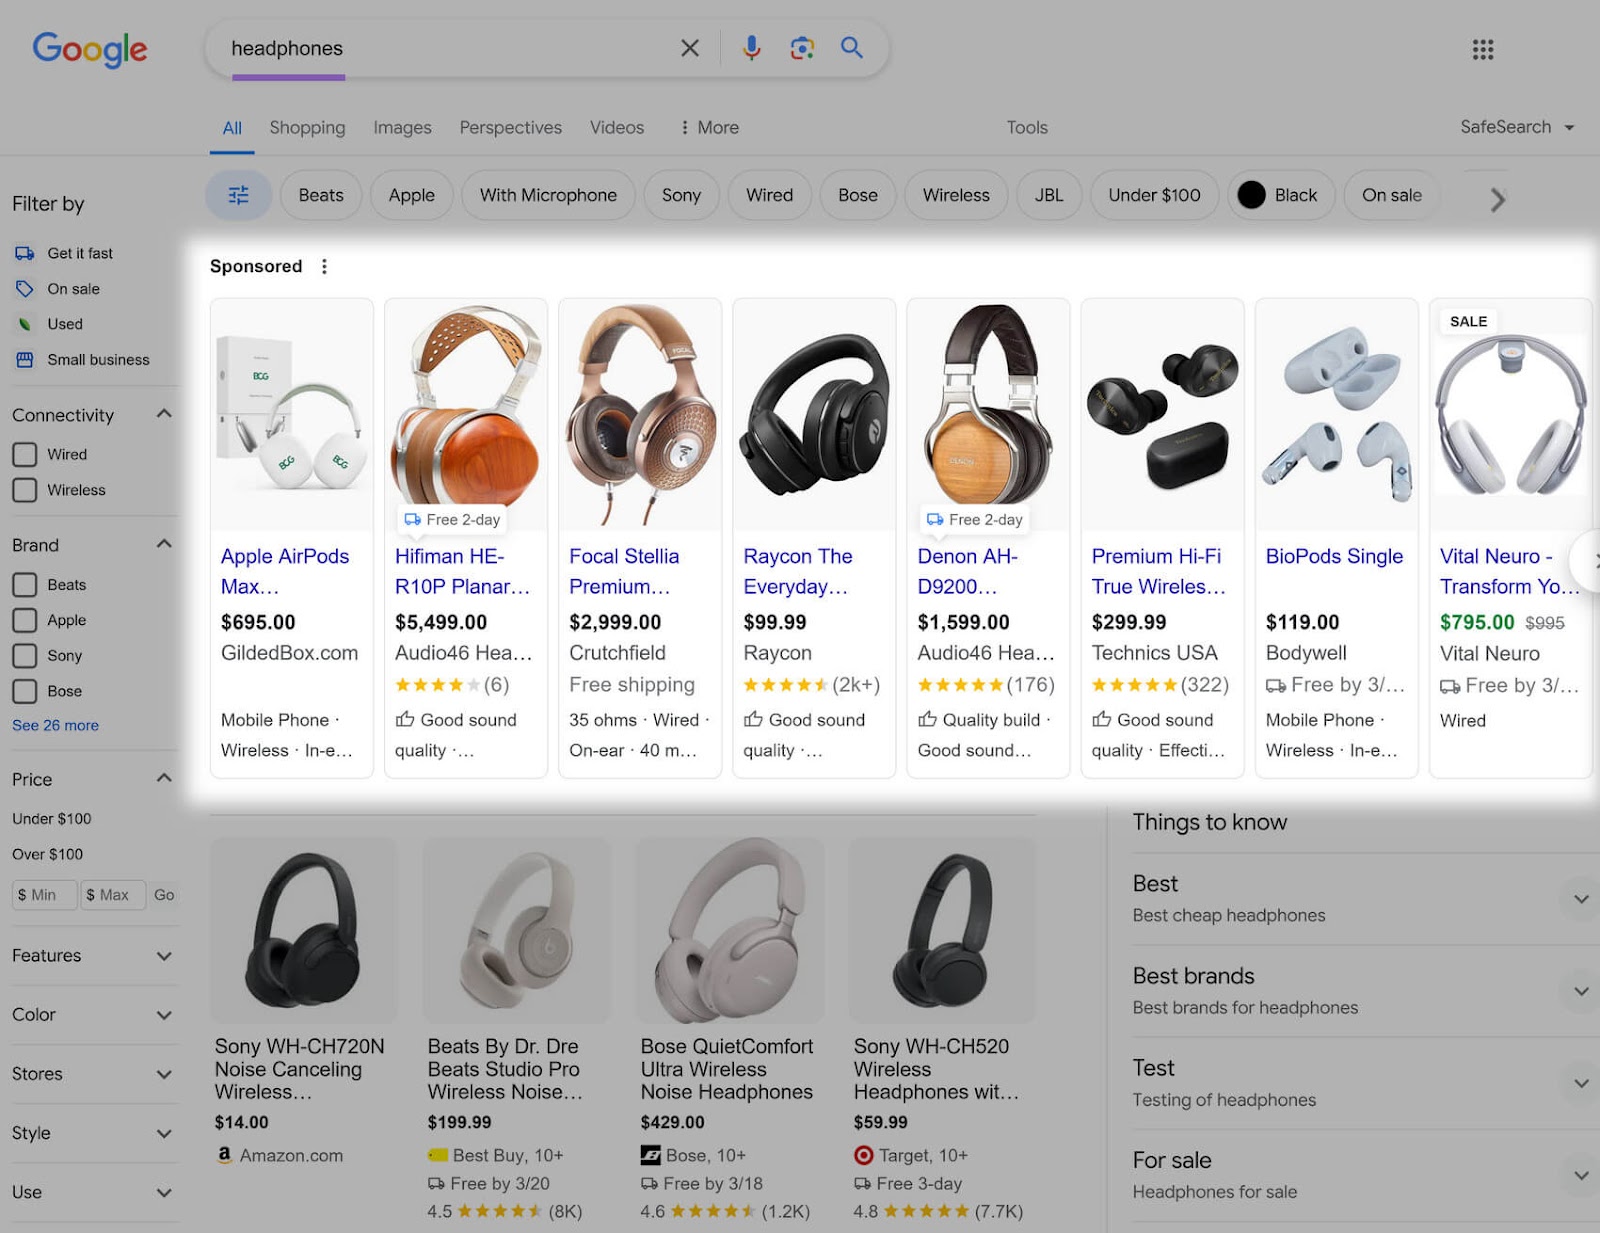 Product Listing Ads (PLAs) on Google SERP for "headphones"